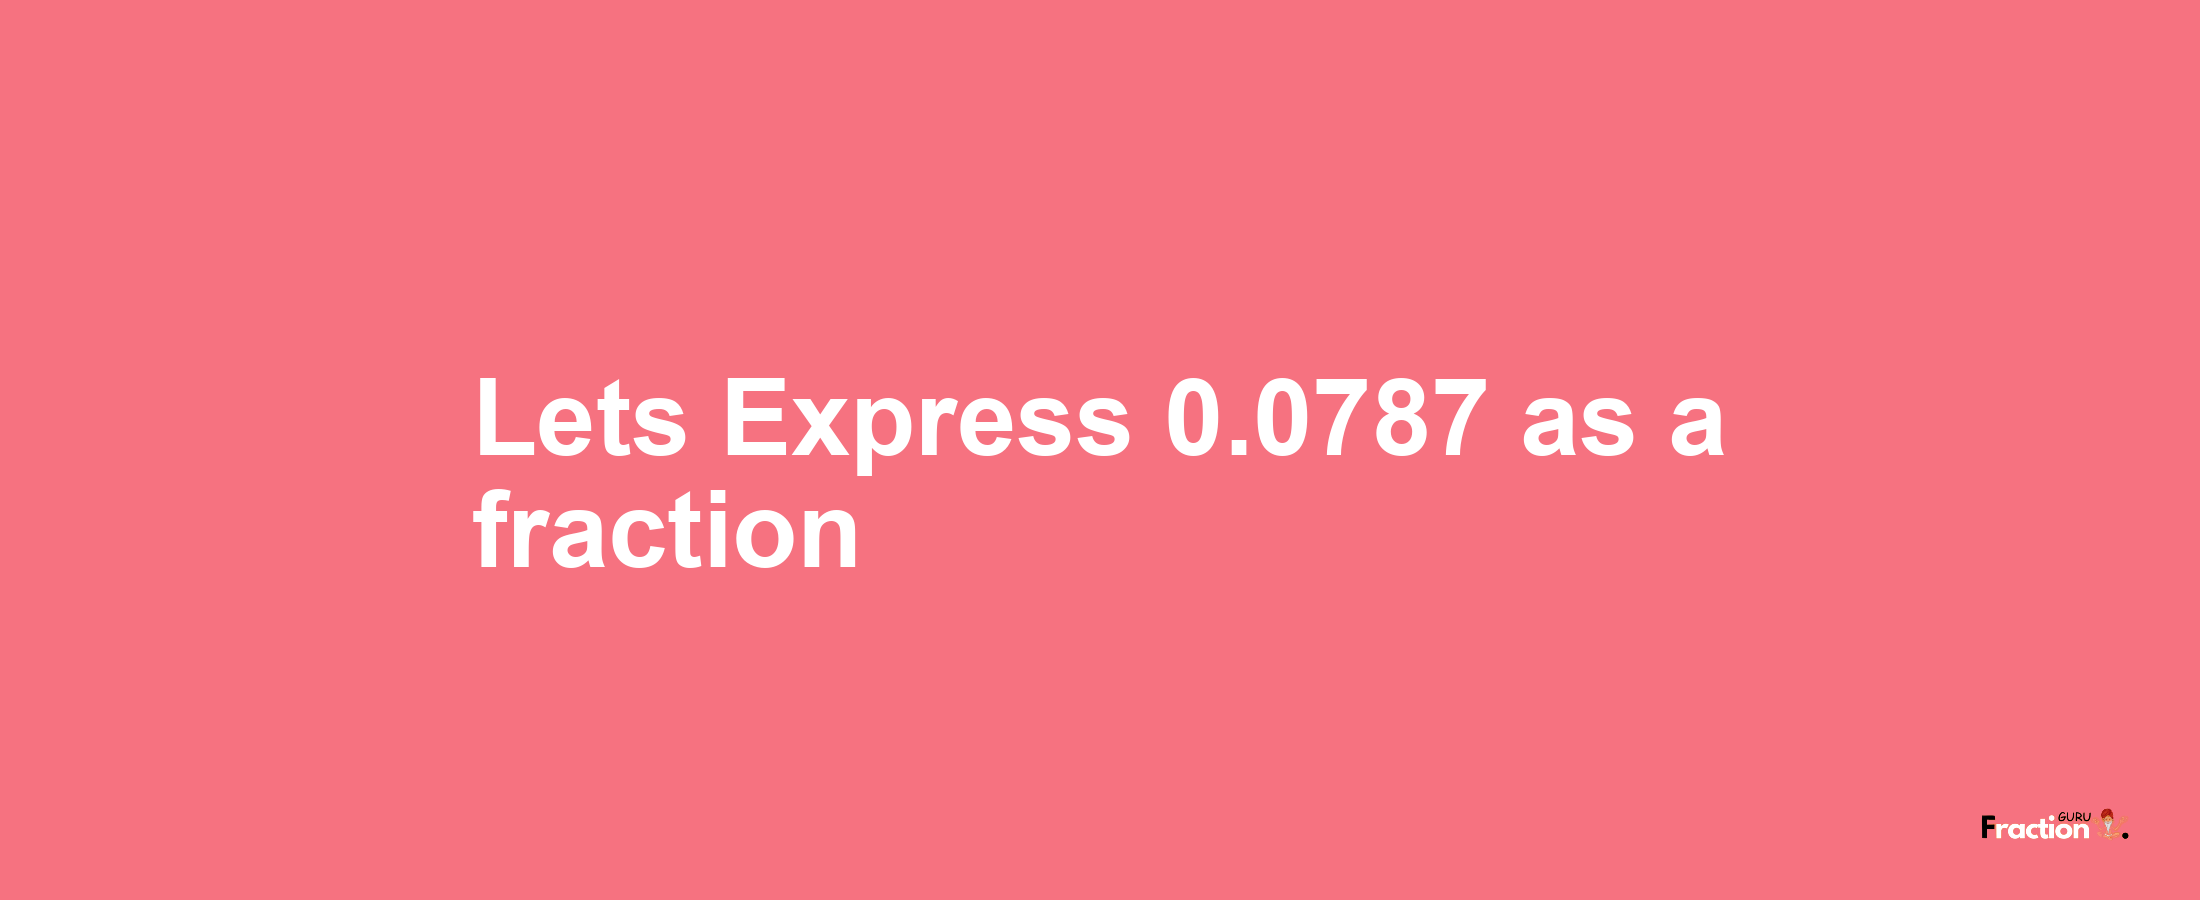 Lets Express 0.0787 as afraction